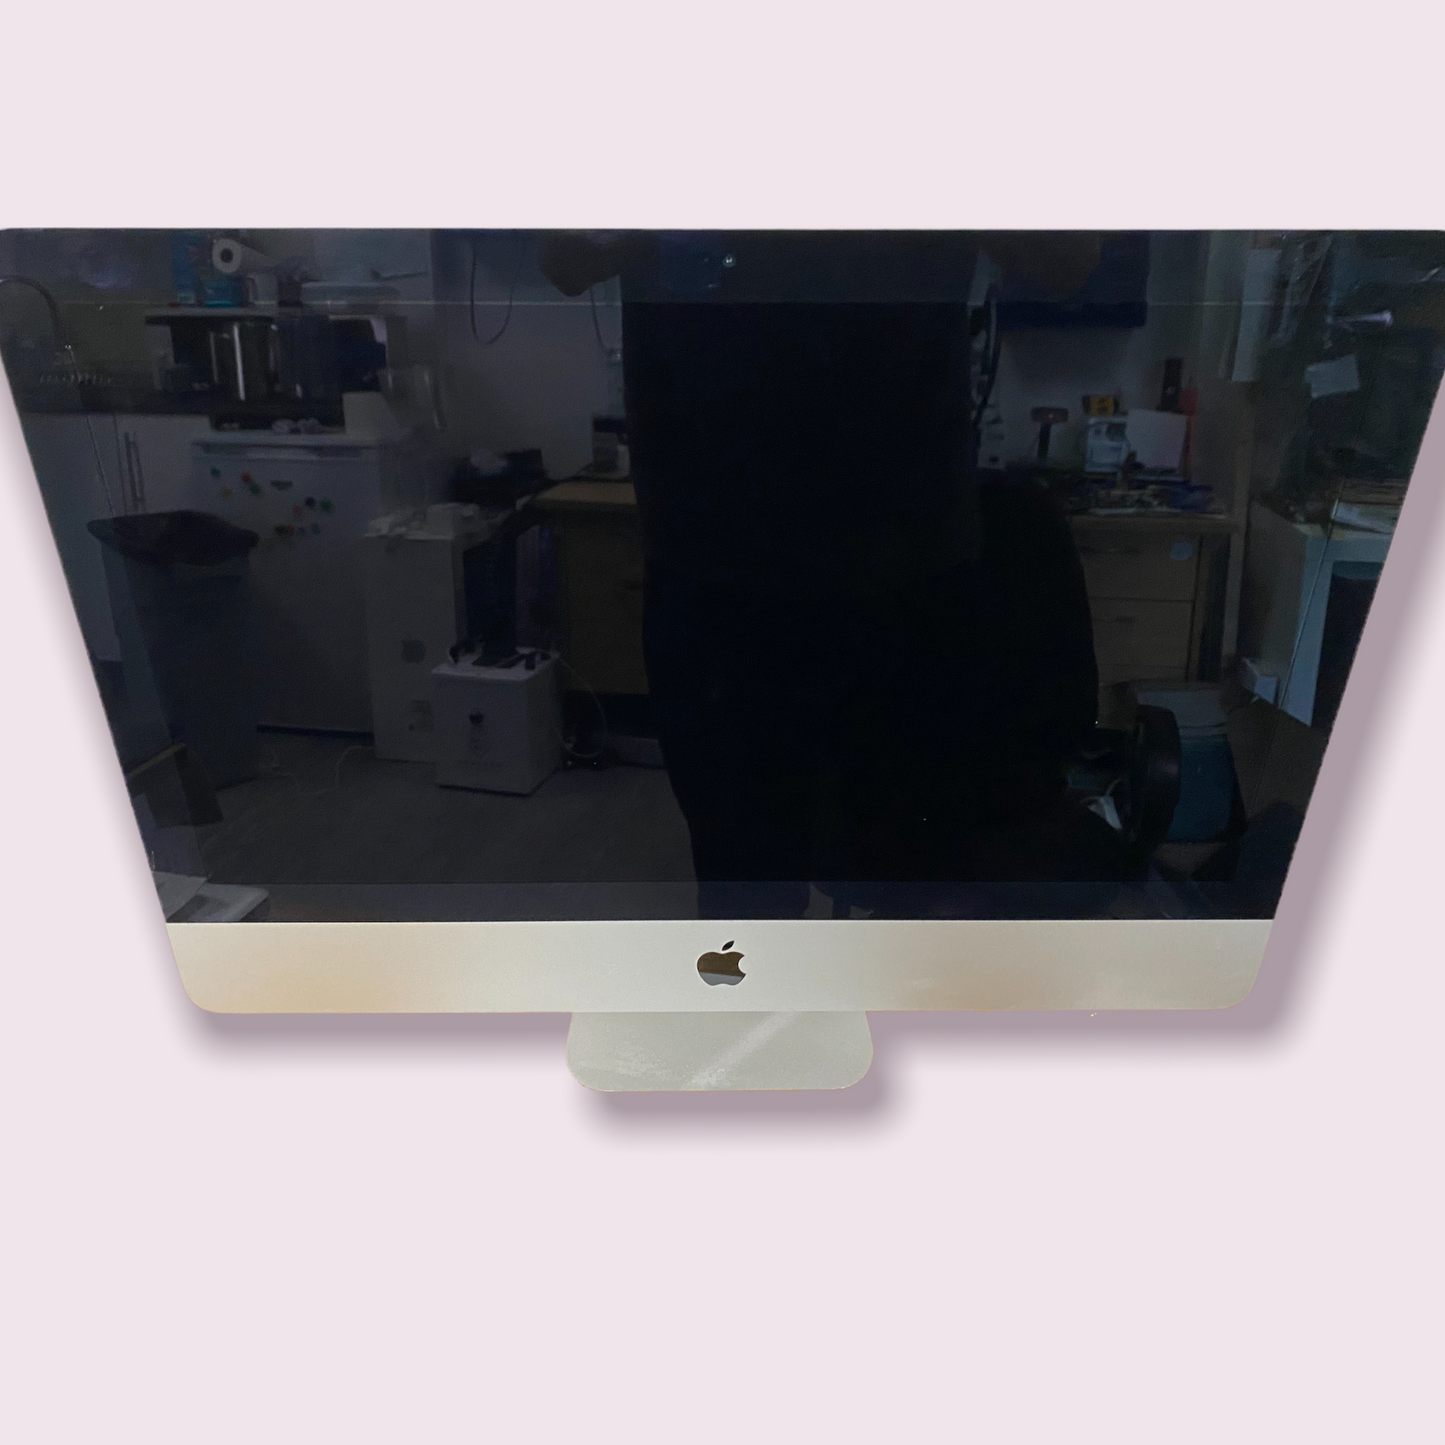 Apple iMac 21.5 2013 i5 @ 2.7GHz 1TB HDD 8GB RAM Intel Iris 1636MB Mojave With Keyboard and Mouse